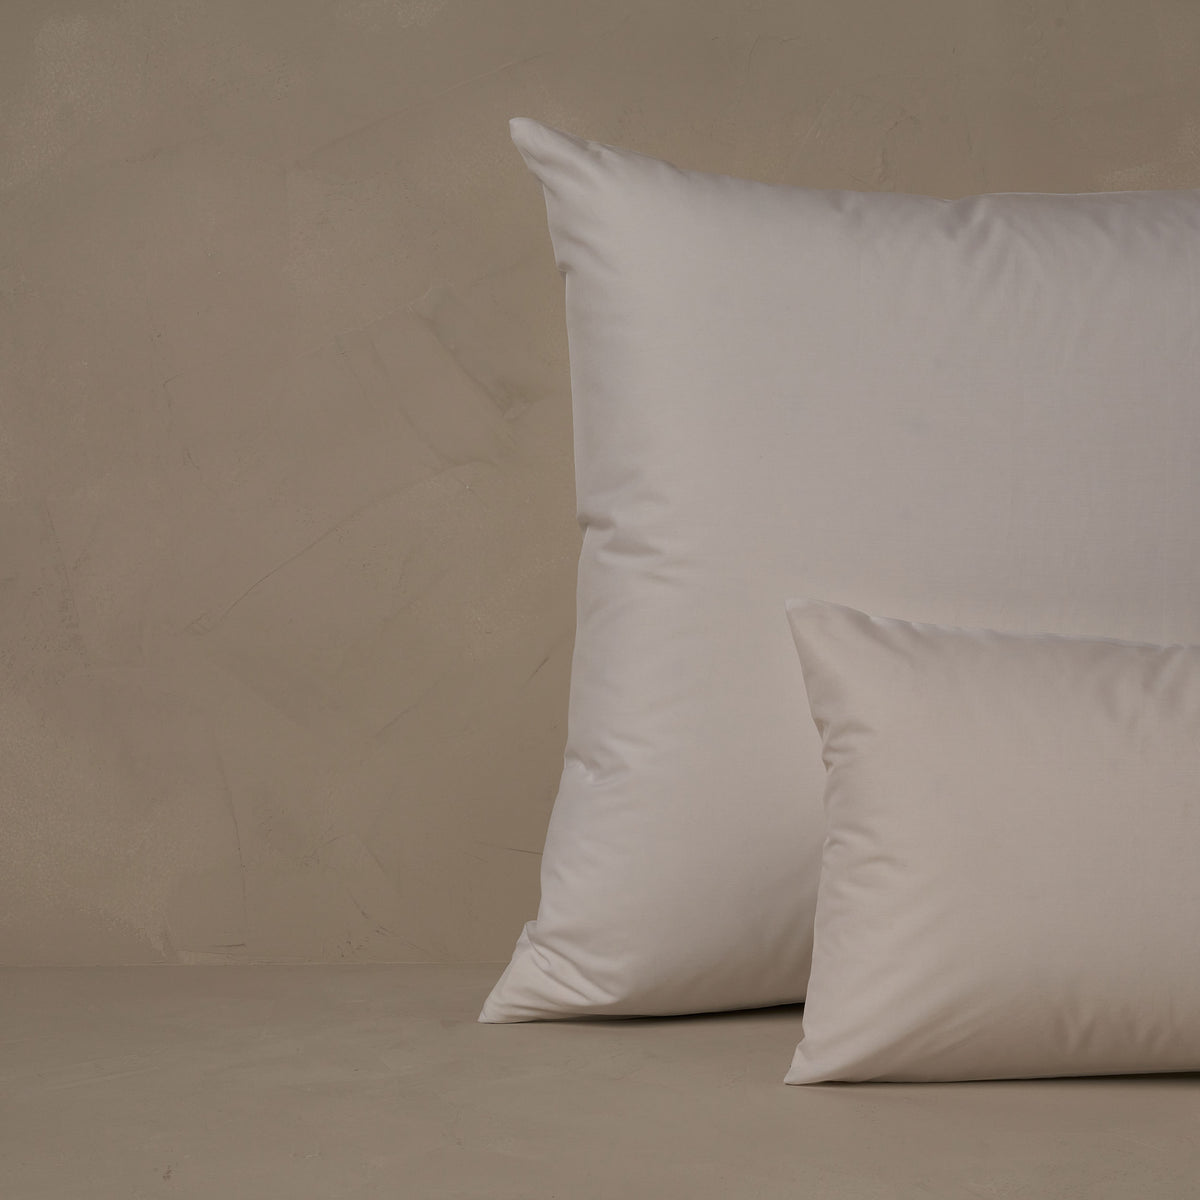 An image of a small boudoir or travel size pillow stacked in front of a large euro size pillow. The pillow cases are made in Italy of ultra soft and cool Sea Island Cotton Percale in color white. data-image-id=